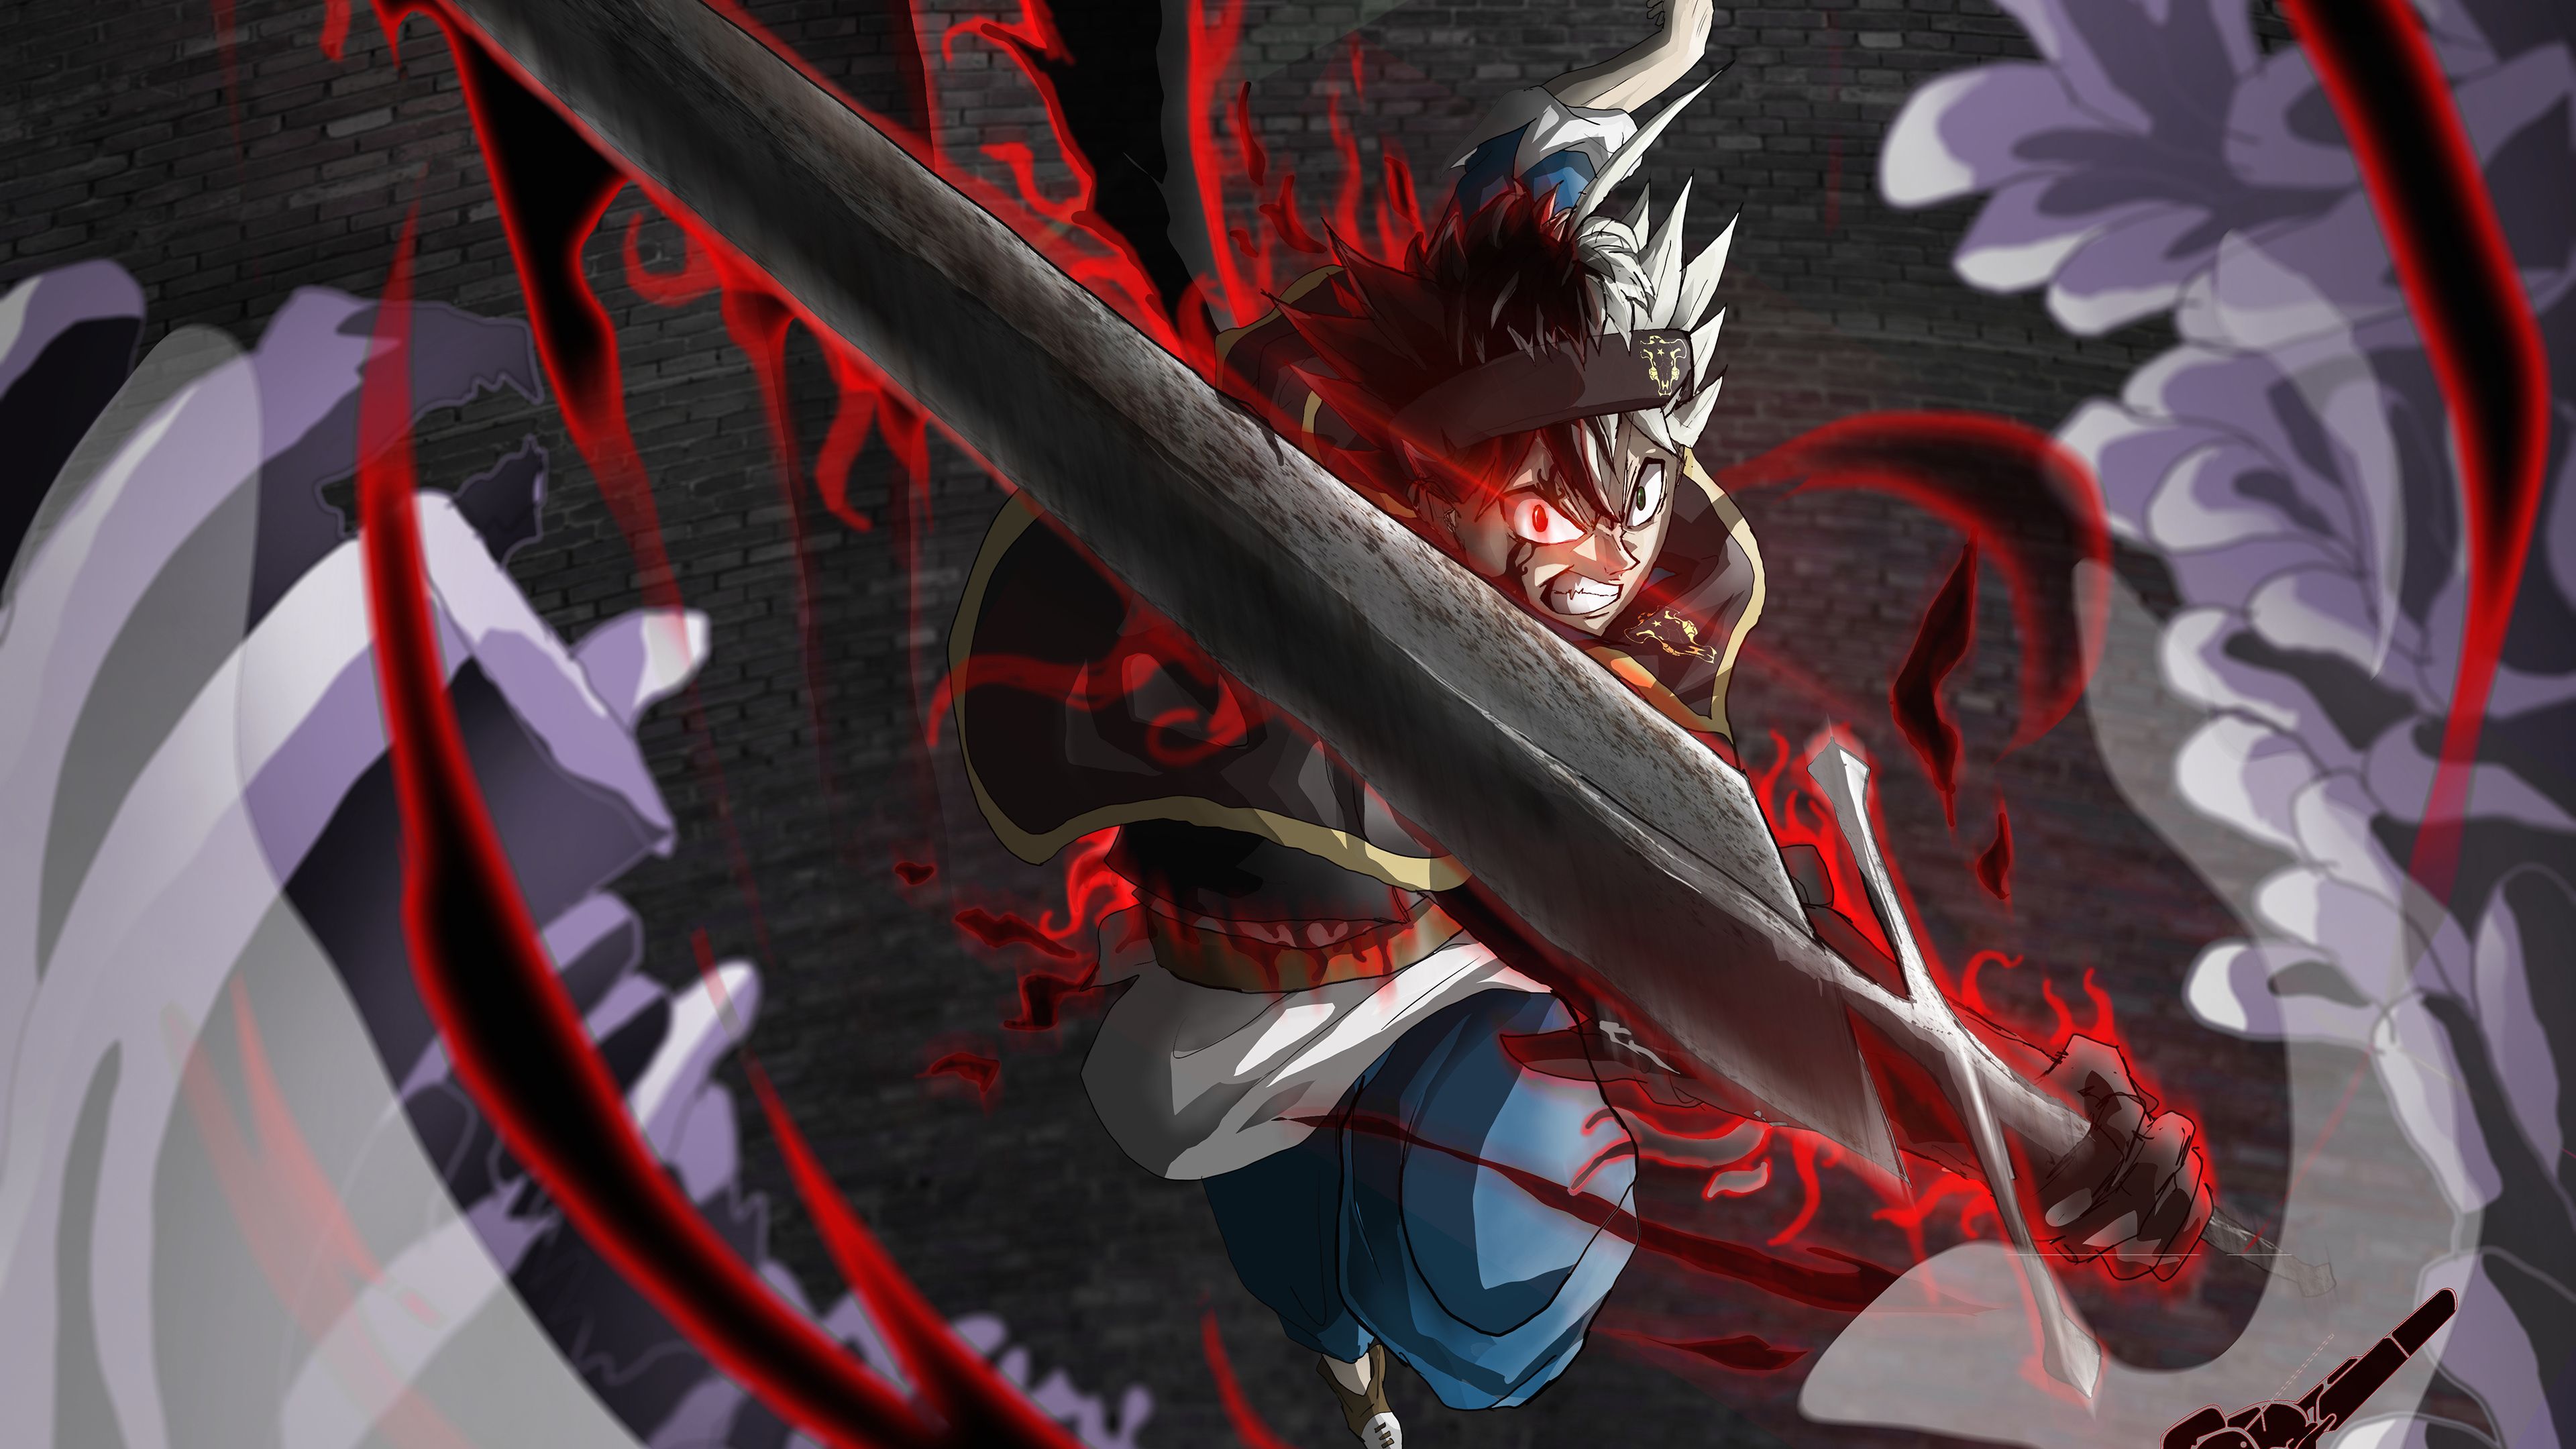 Black Clover Wallpaper 4K - Black Clover Wallpapers Posted By Sarah